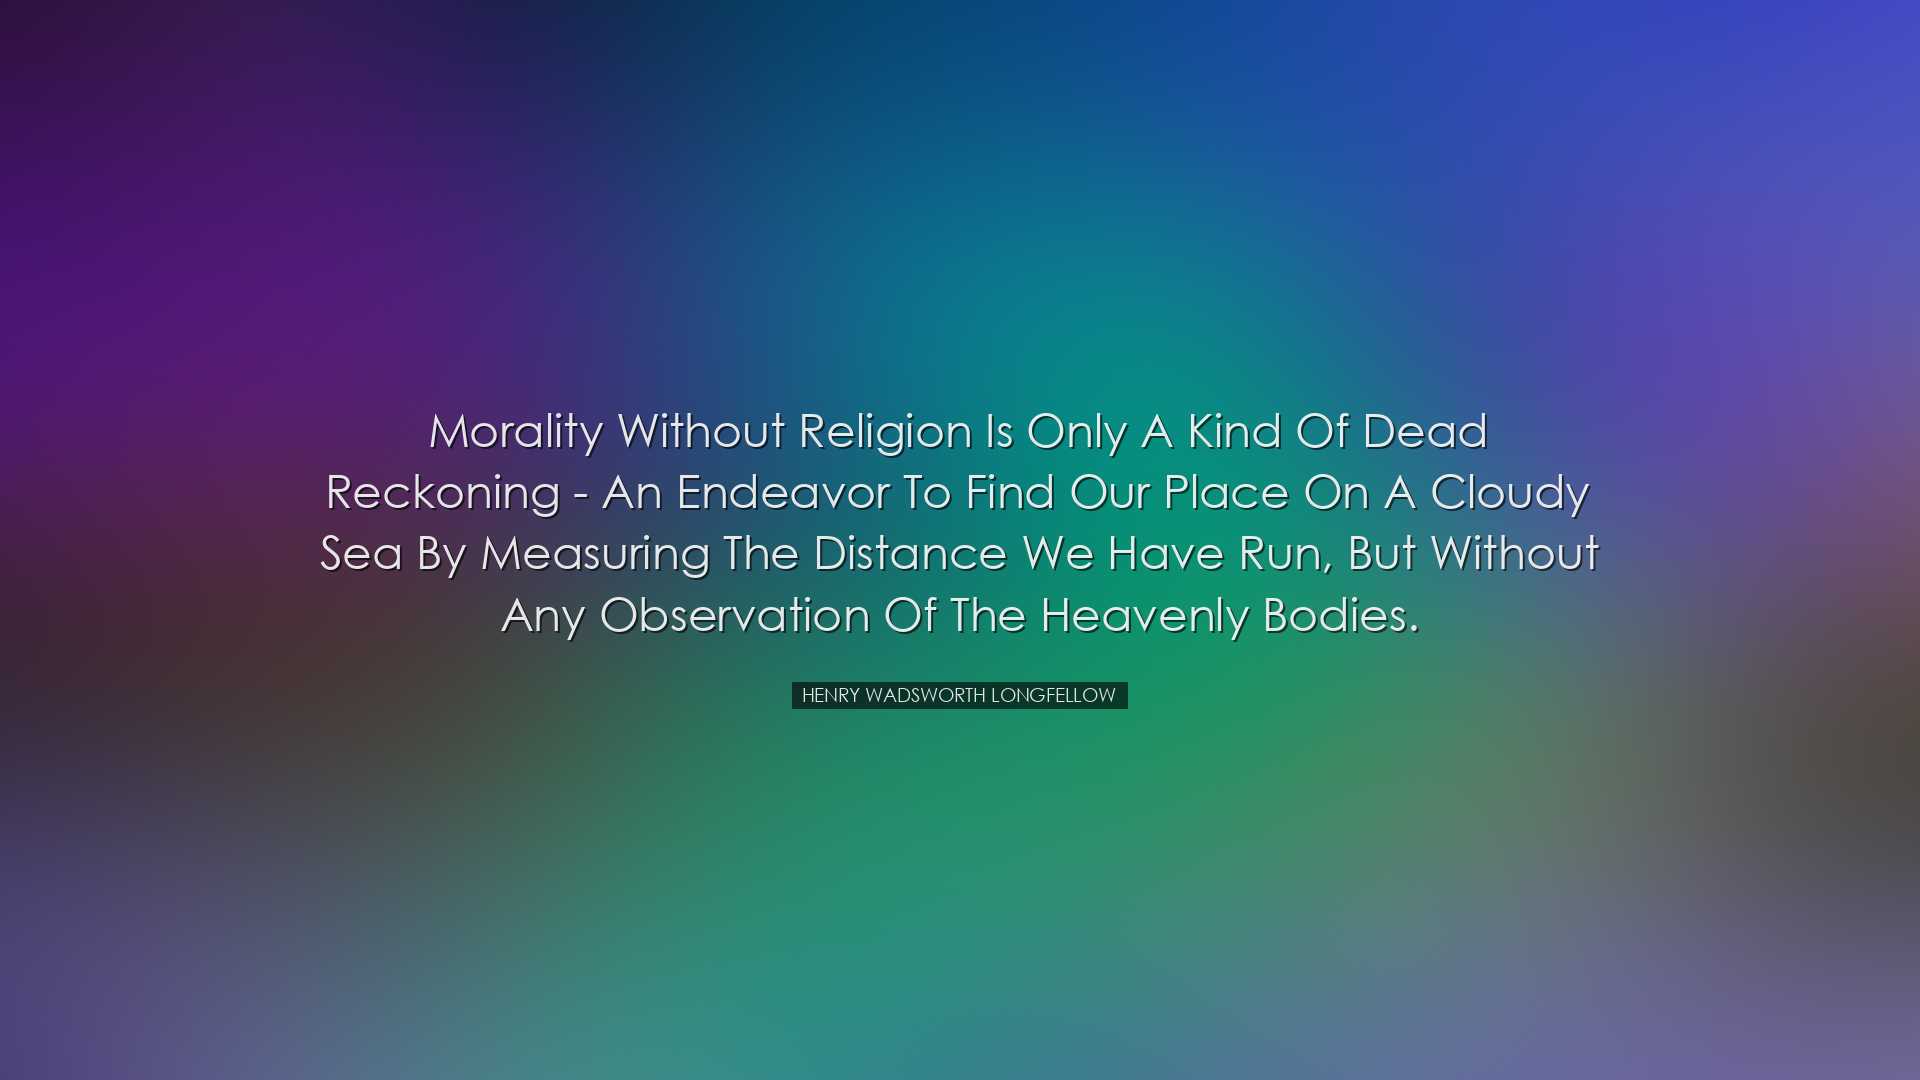 Morality without religion is only a kind of dead reckoning - an en